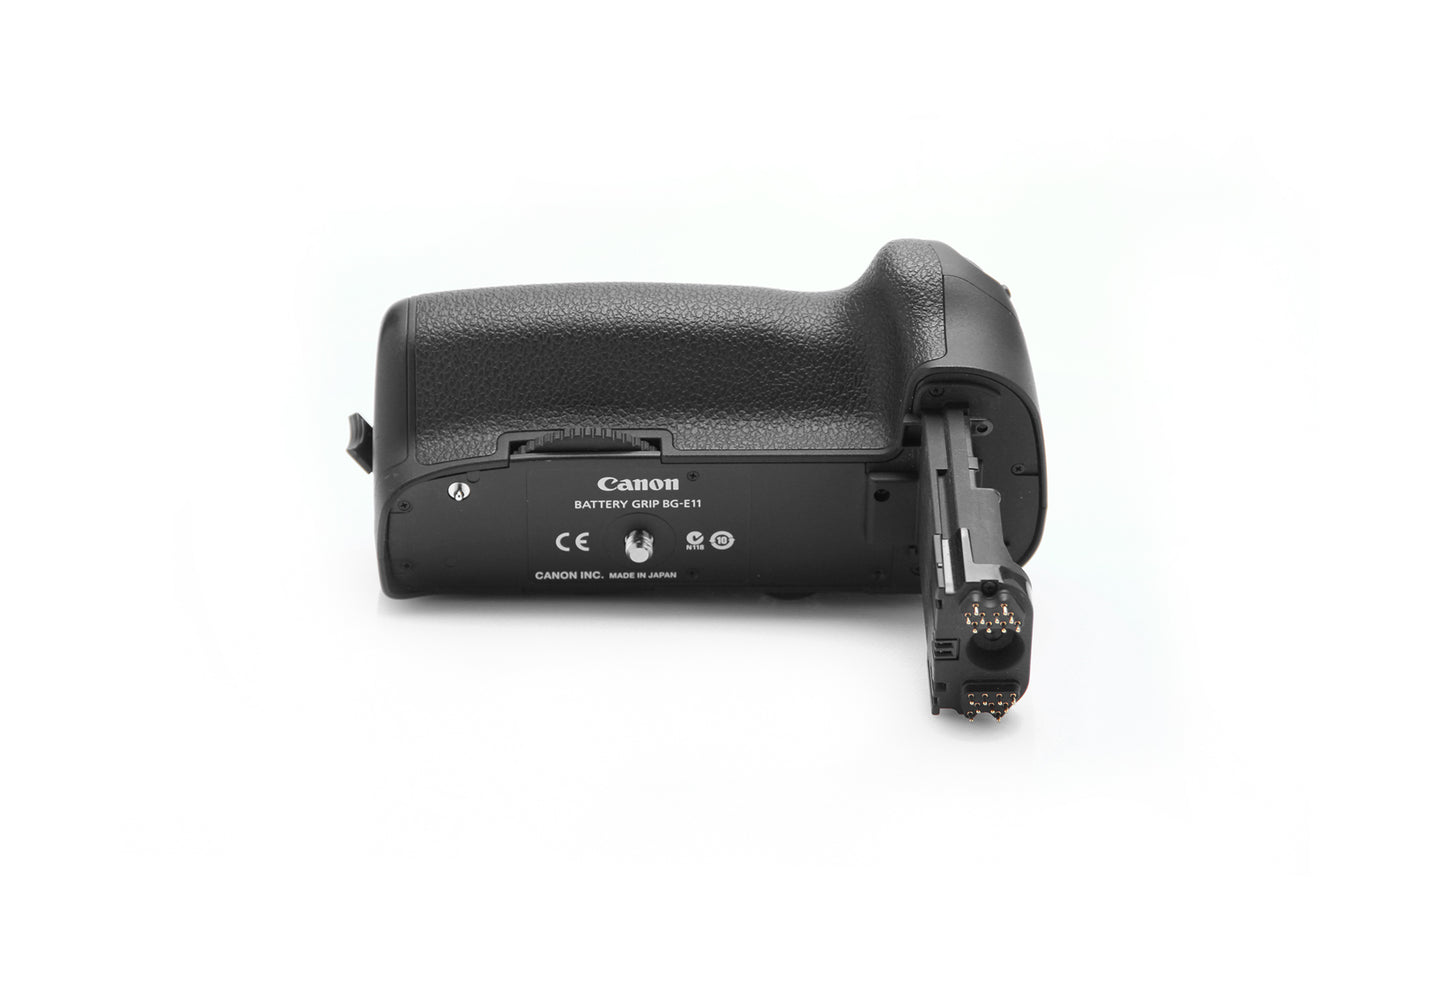 Used Canon BG-E11 Battery Grip for EOS 5D Mark III, 5DS & 5DS R